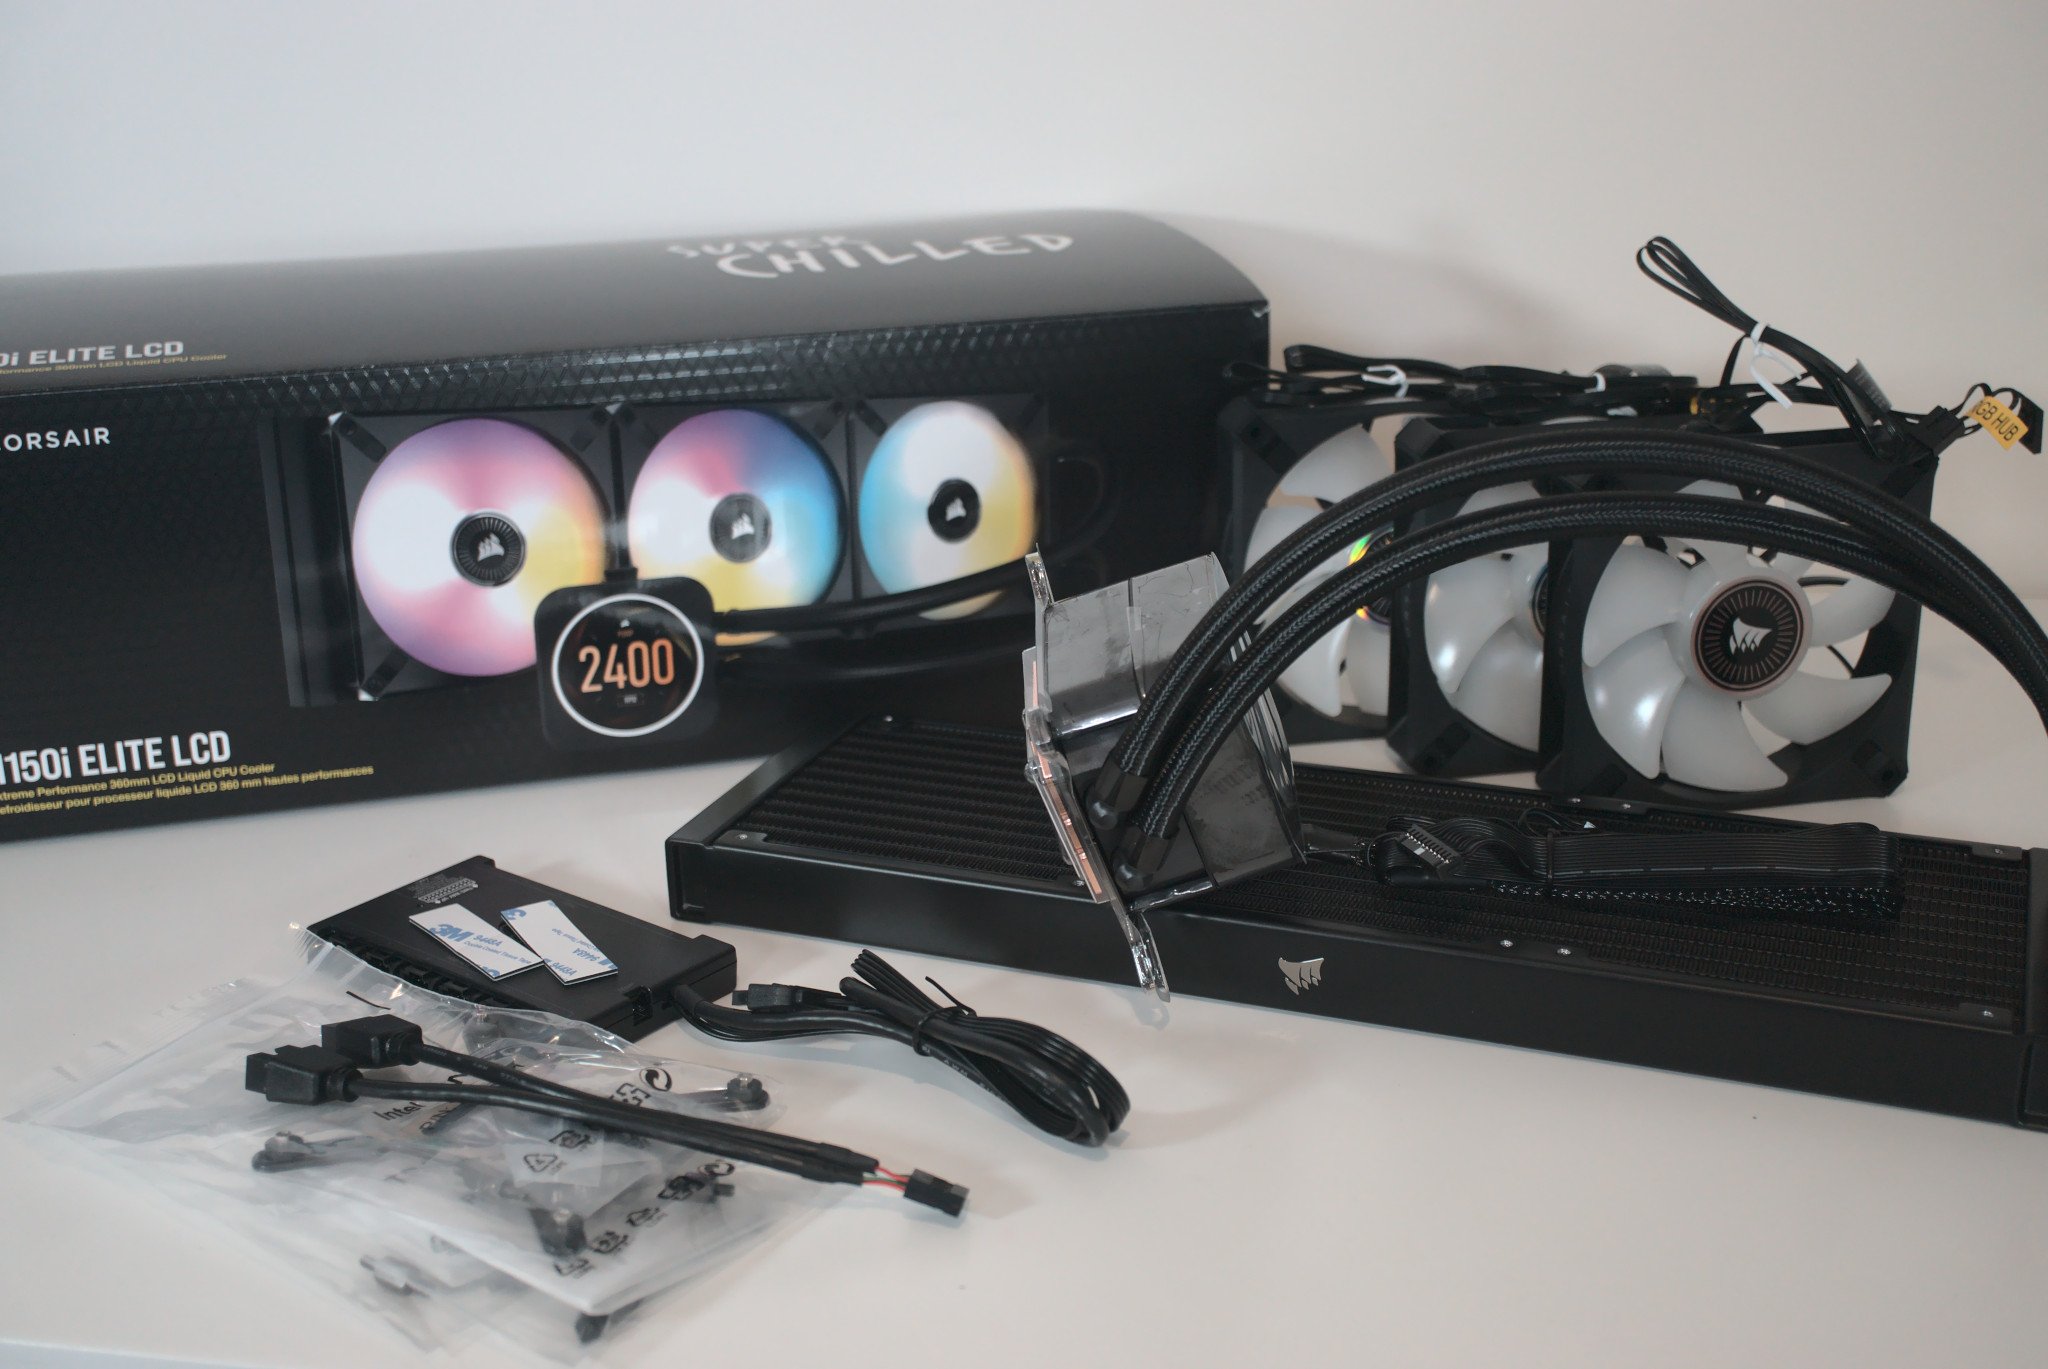 Corsair H150i Elite LCD review: Excellent cooling performance with